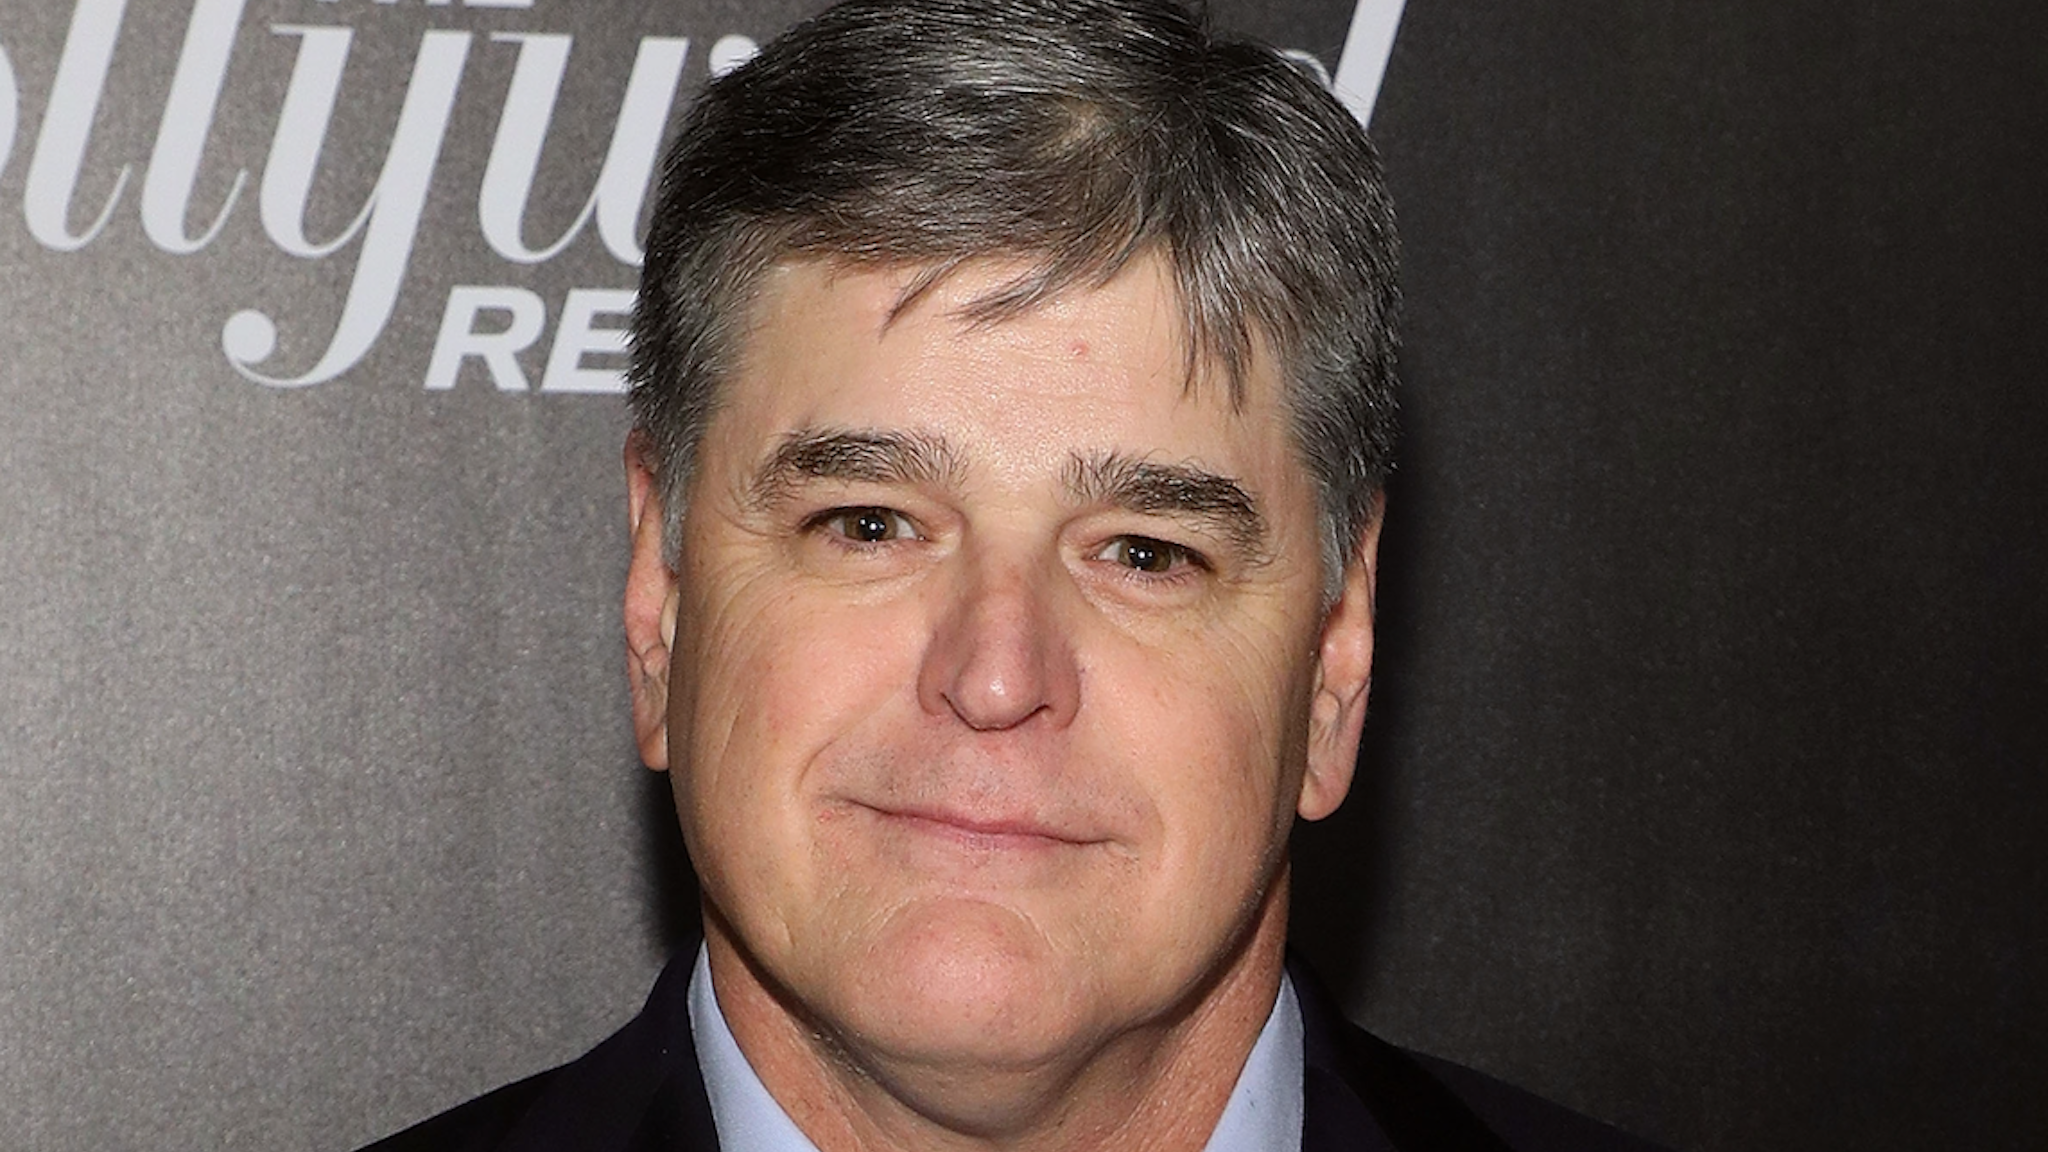 Sean Hannity attends the 2018 The Hollywood Reporter's 35 Most Powerful People In Media at The Pool on April 12, 2018 in New York City.